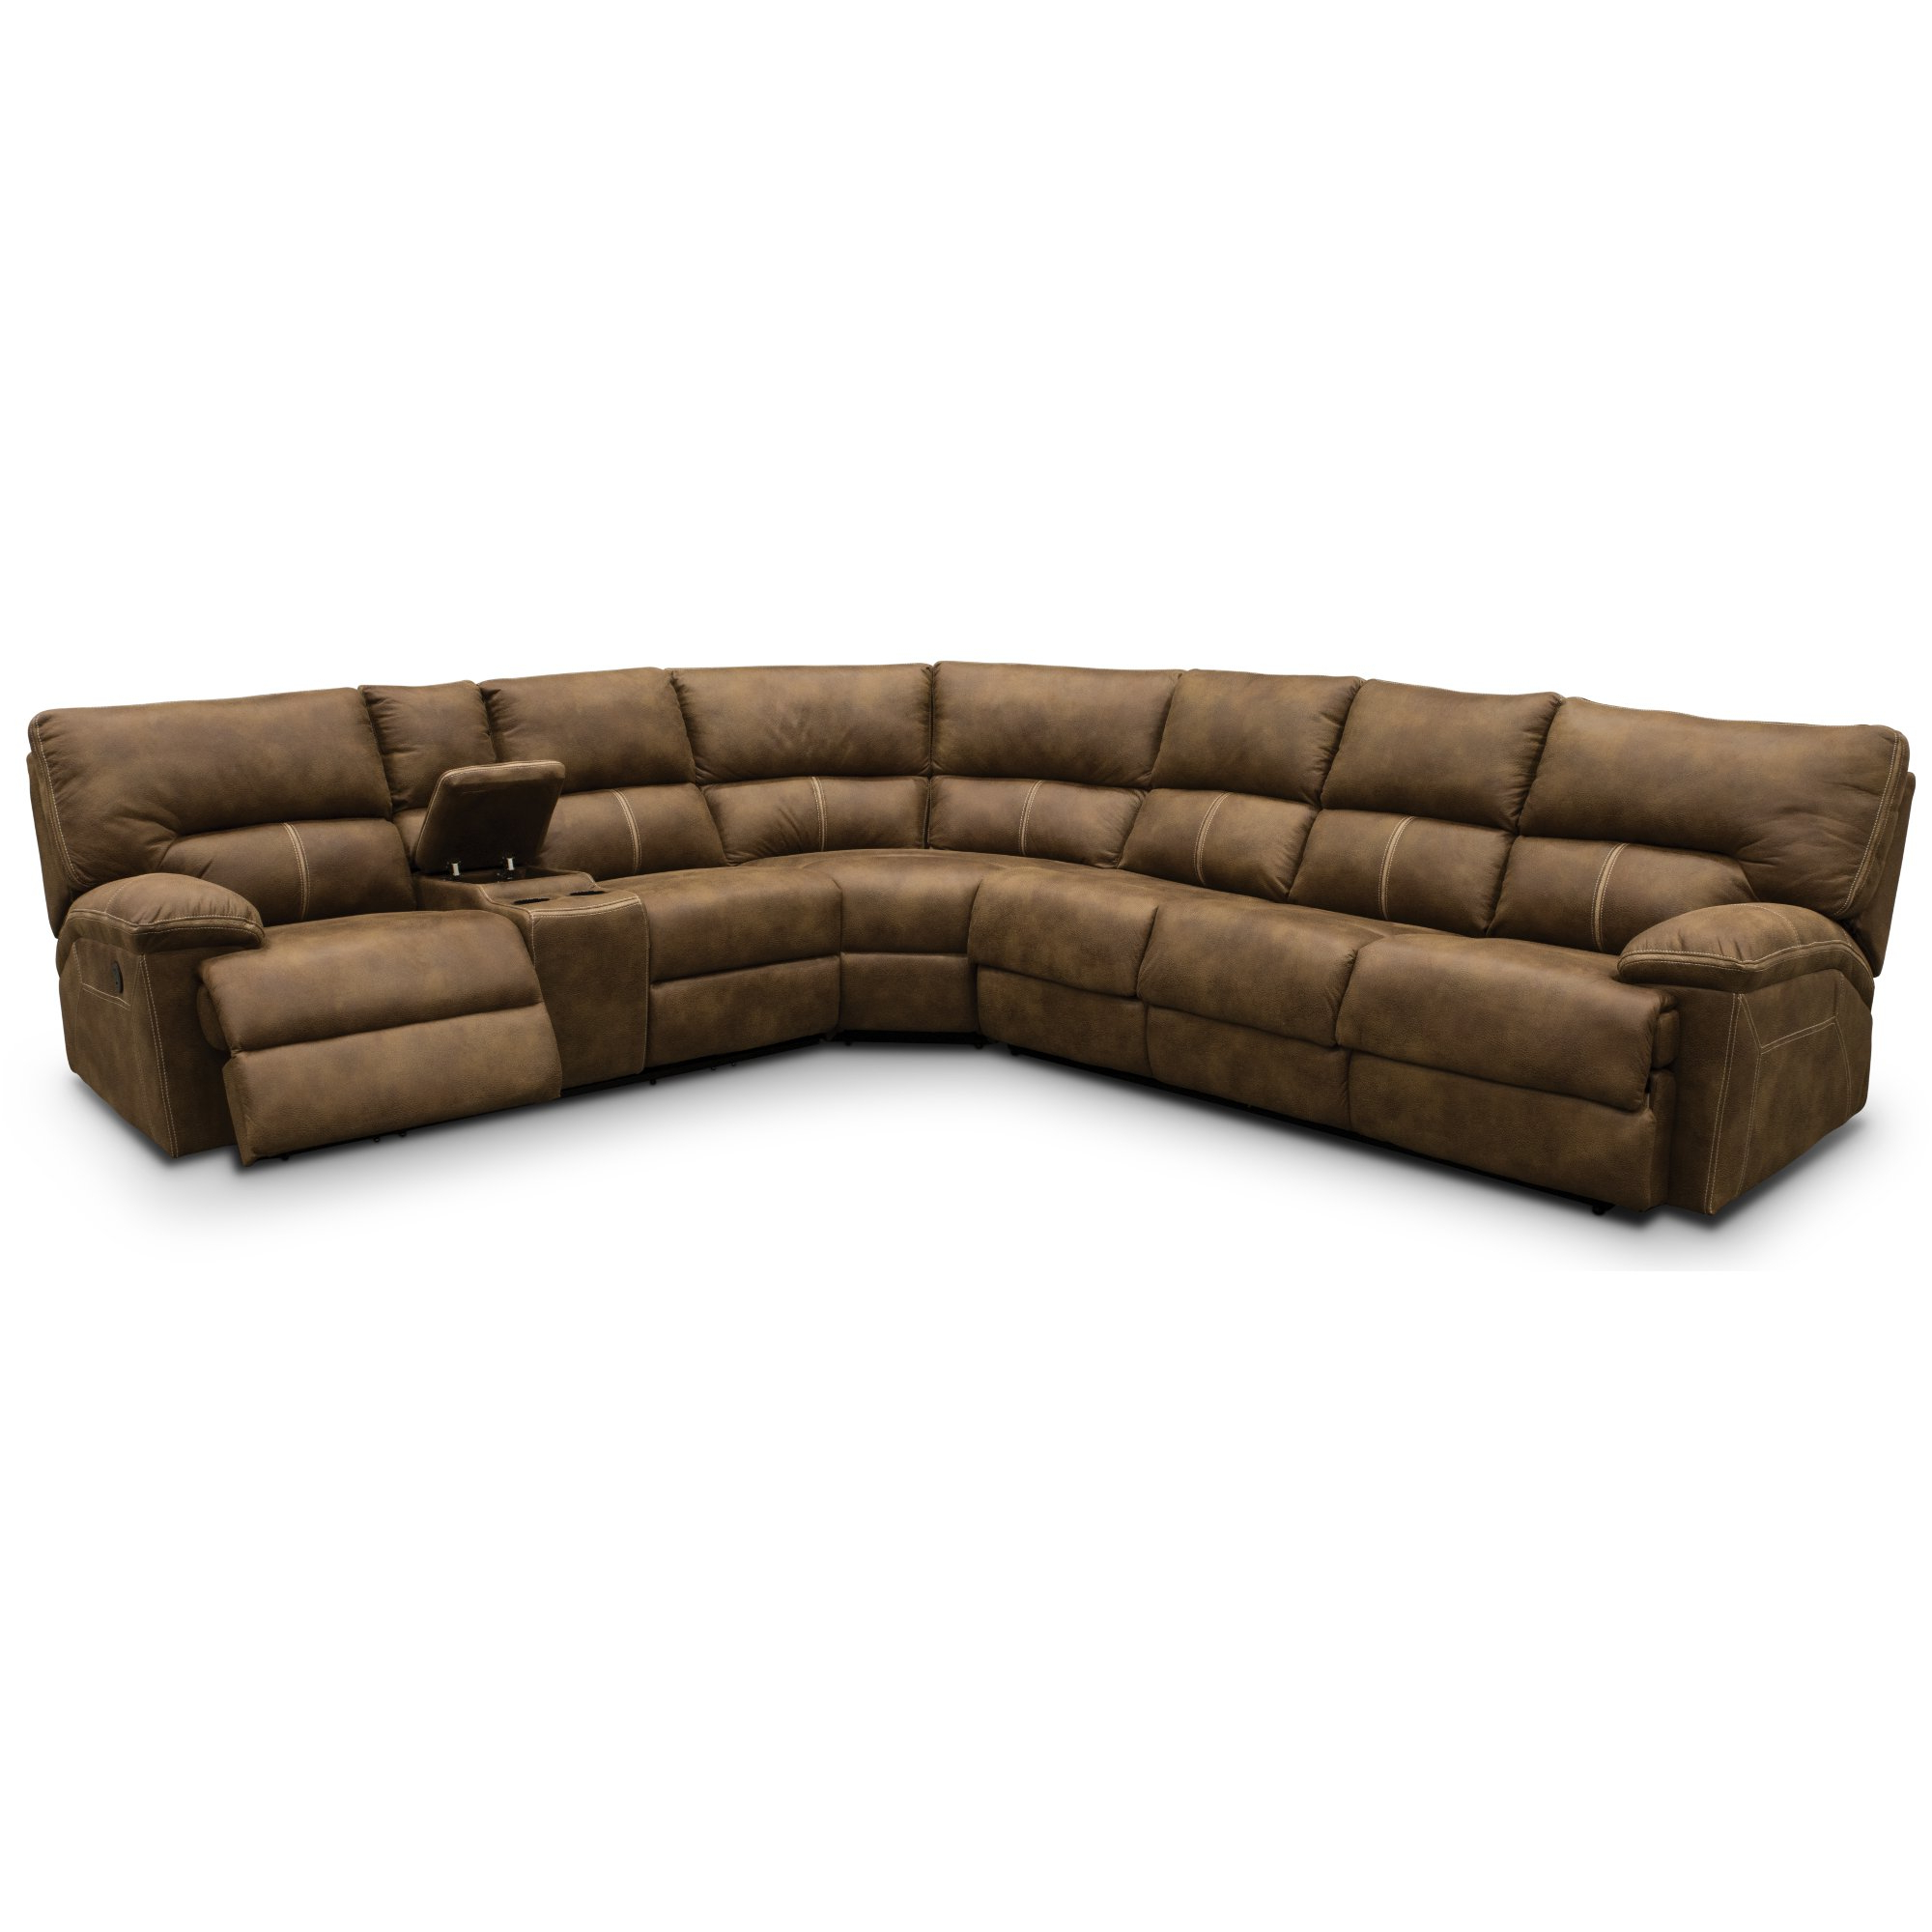 Taron 3 Piece Power Reclining Sectionals With Left Facing Console
Loveseat